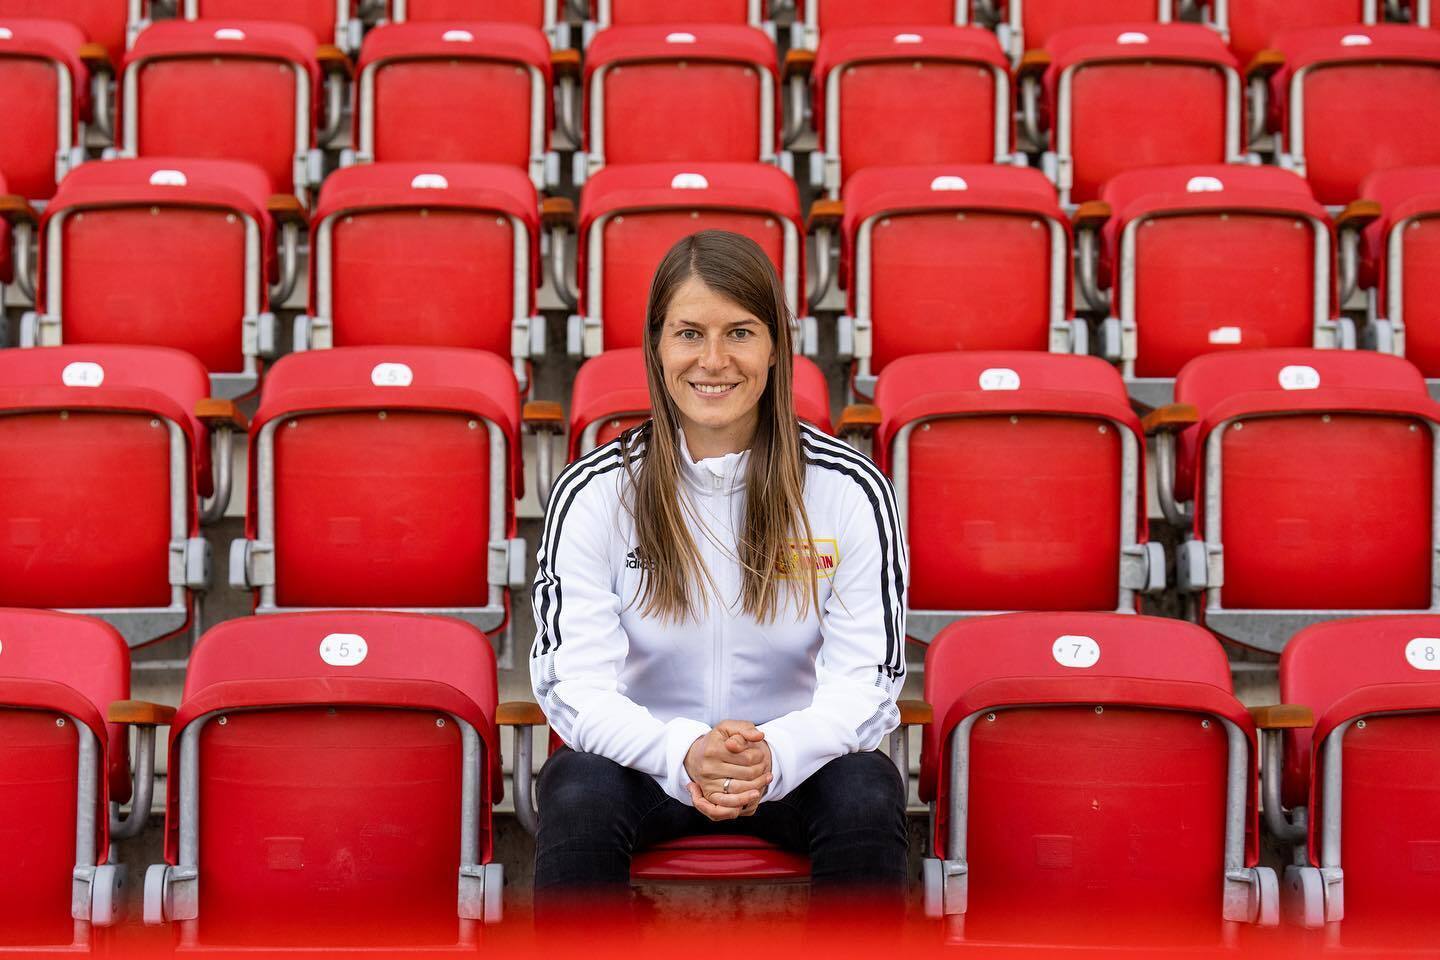 First time in history. A German beauty became the coach of a men's soccer club in the Bundesliga. Photo